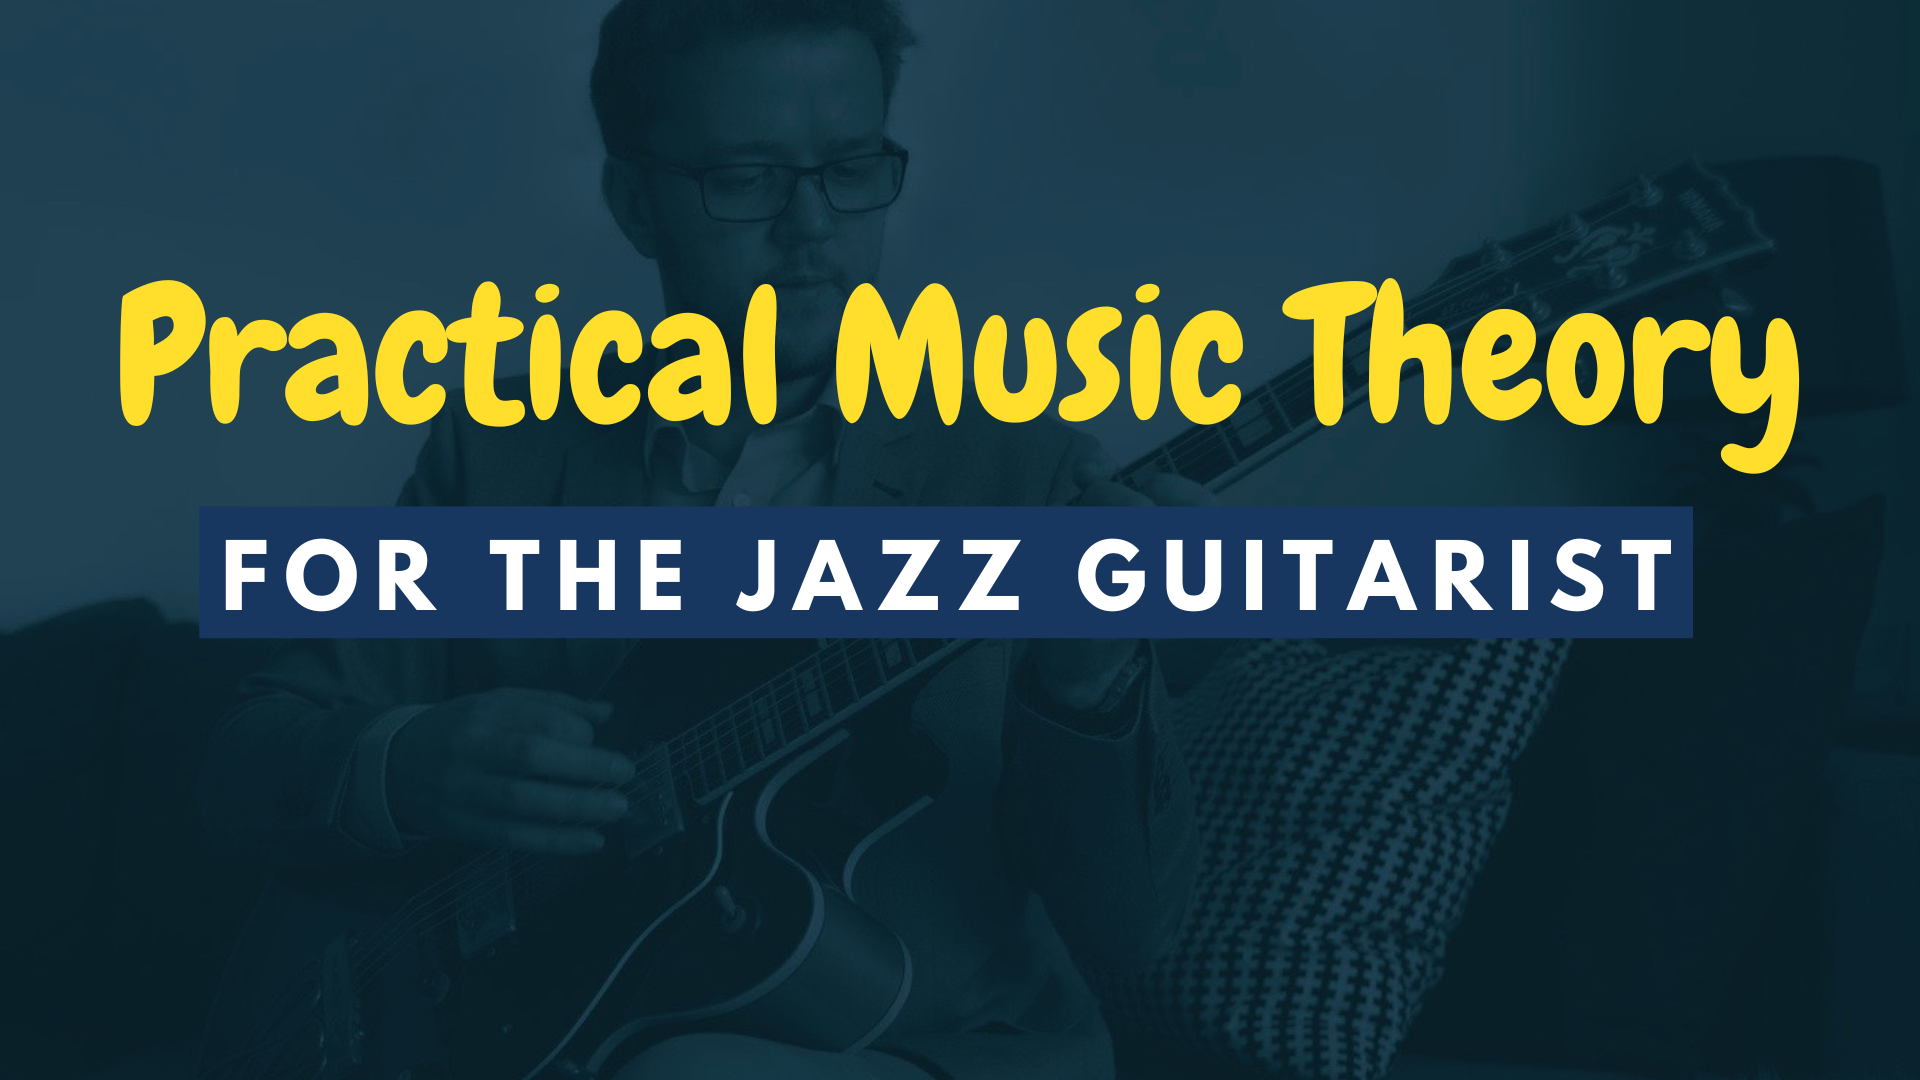 Practical Music Theory for the Jazz Guitarist